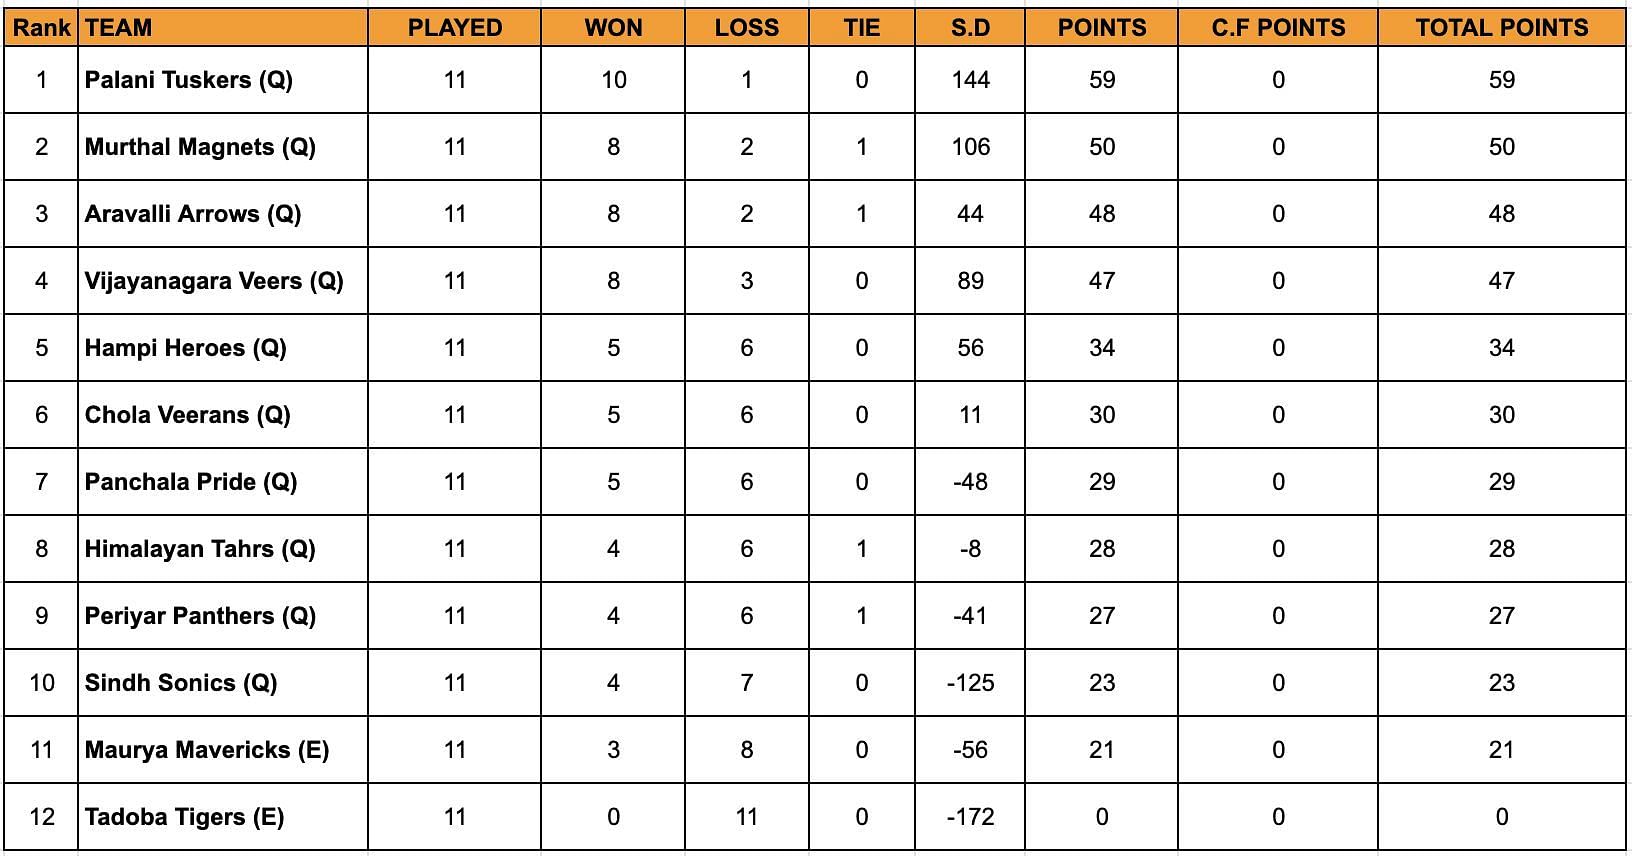 YKS standings after conclusion of Day 15